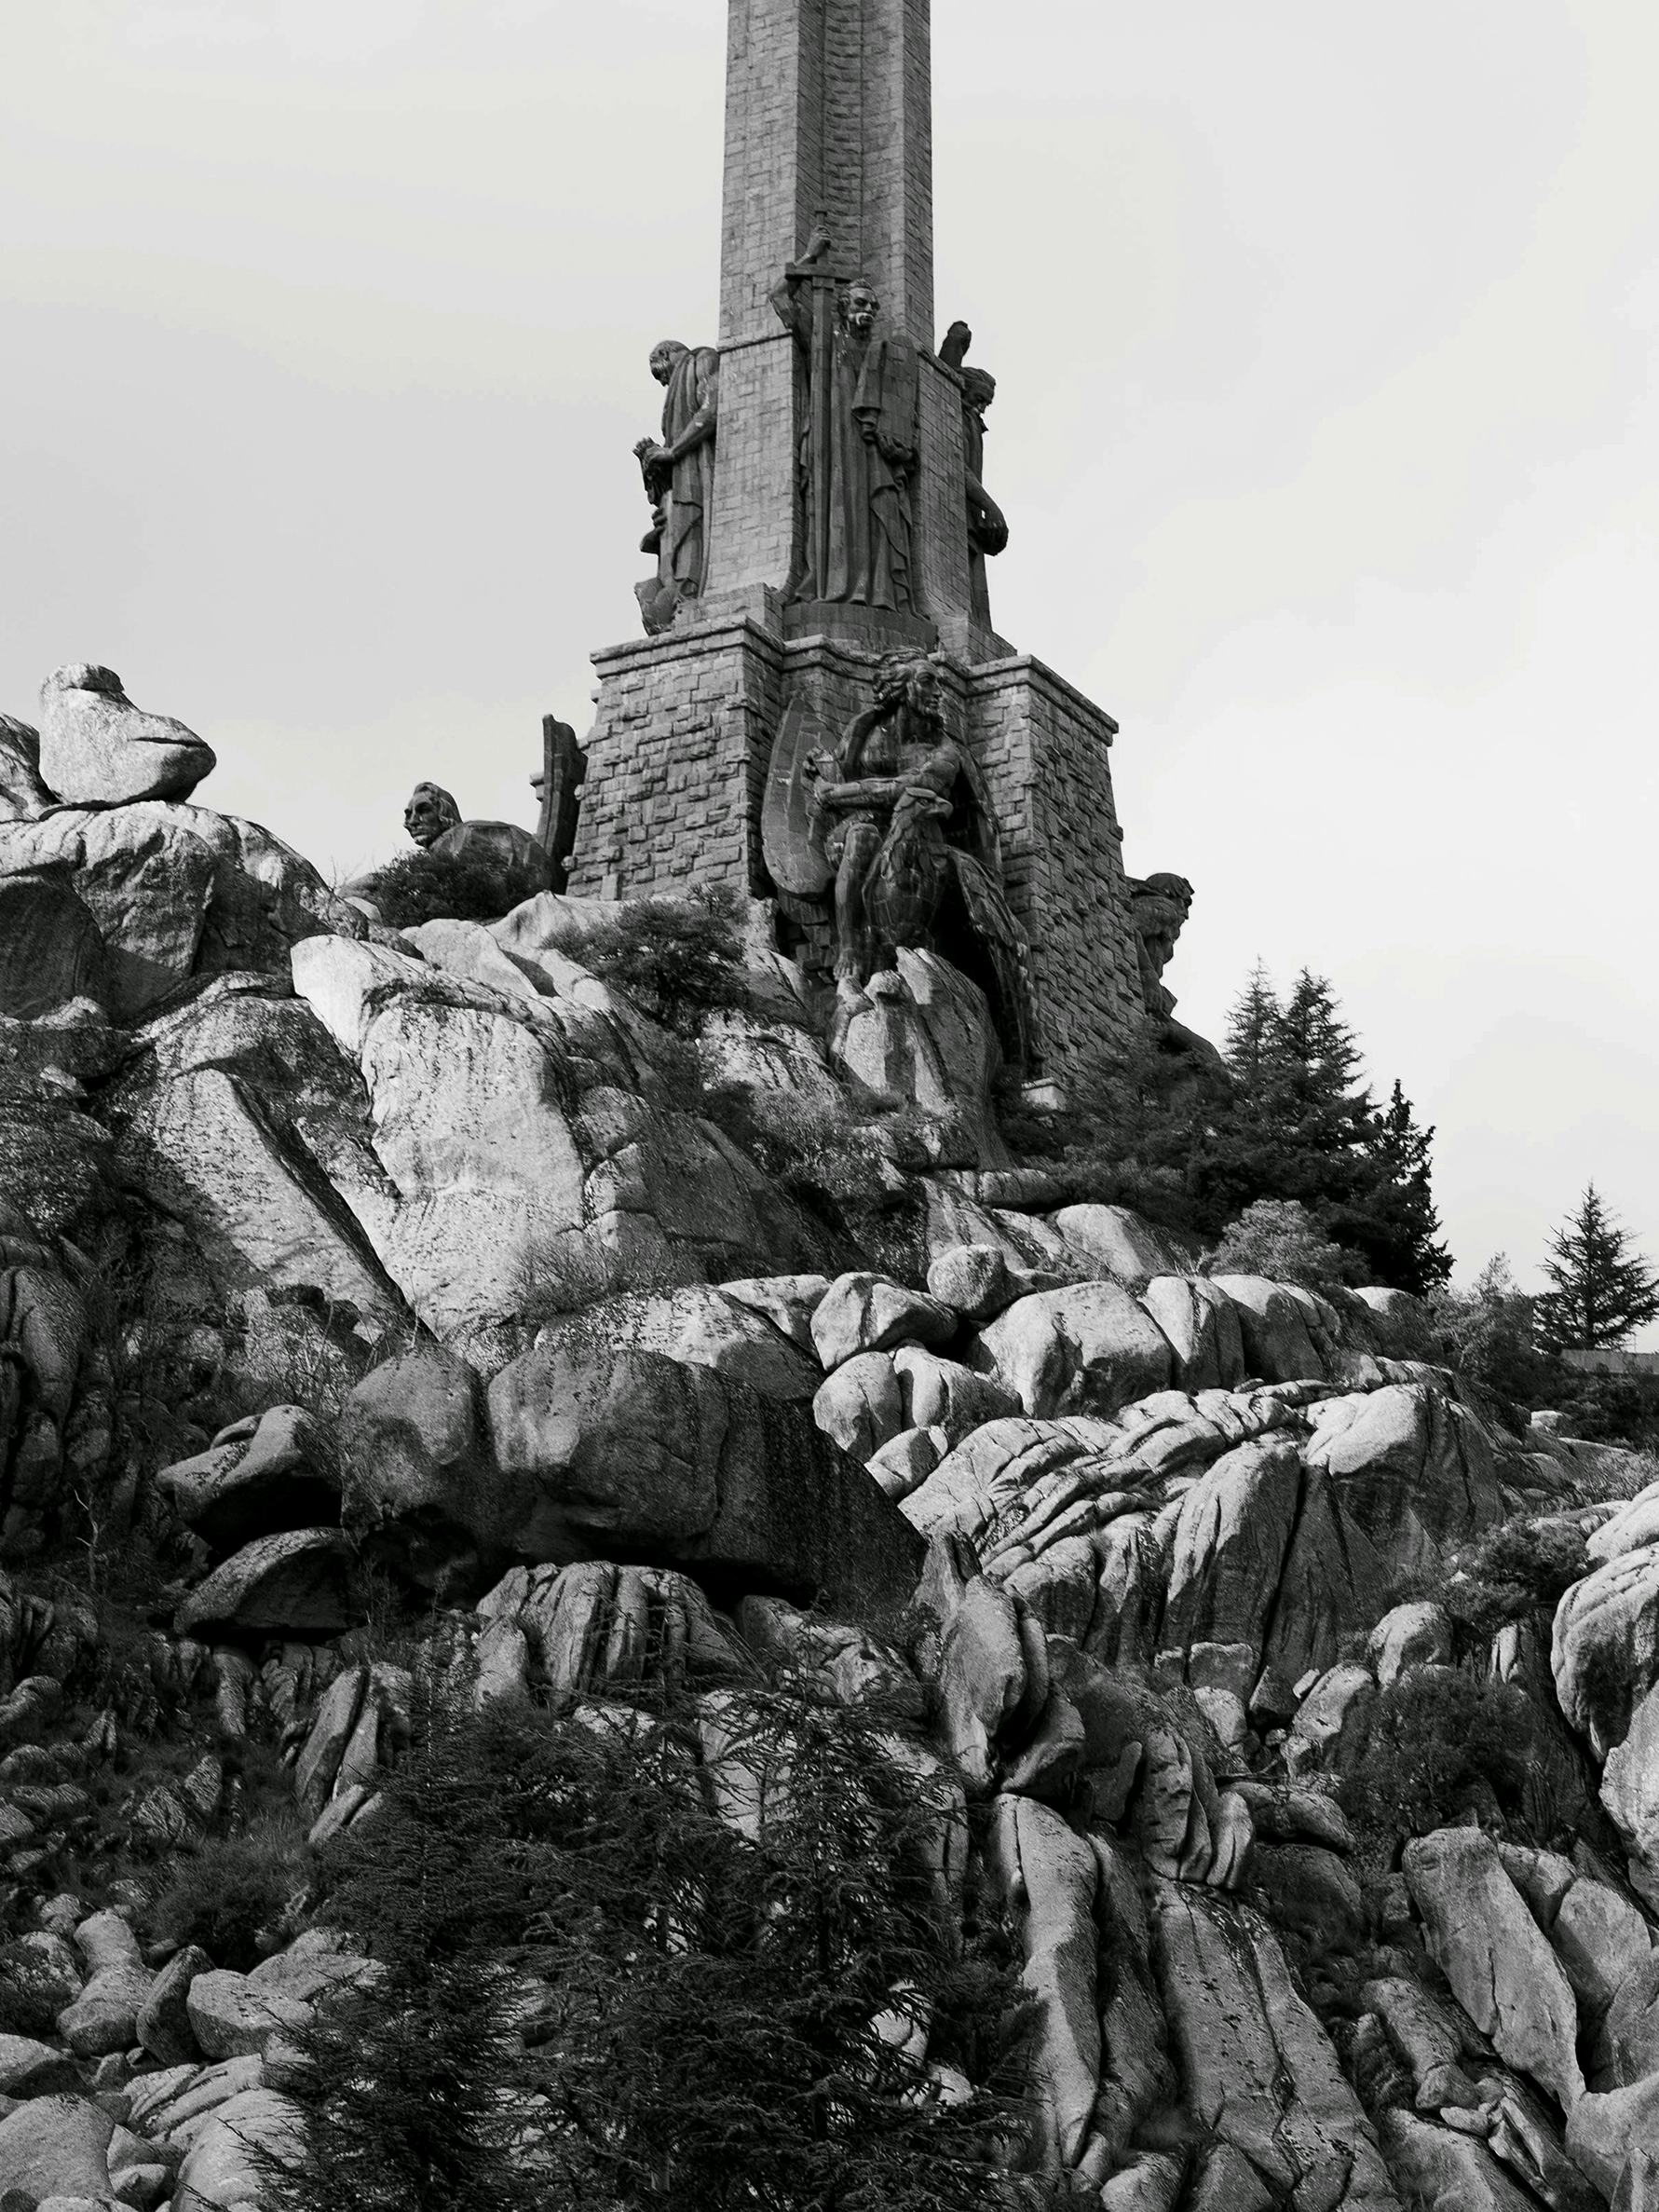 Black and white image of a rocky environment, in the Valley of the Fallen (Spain). The base of a large monument with statues is visible. © Bebe Blanco Agterberg